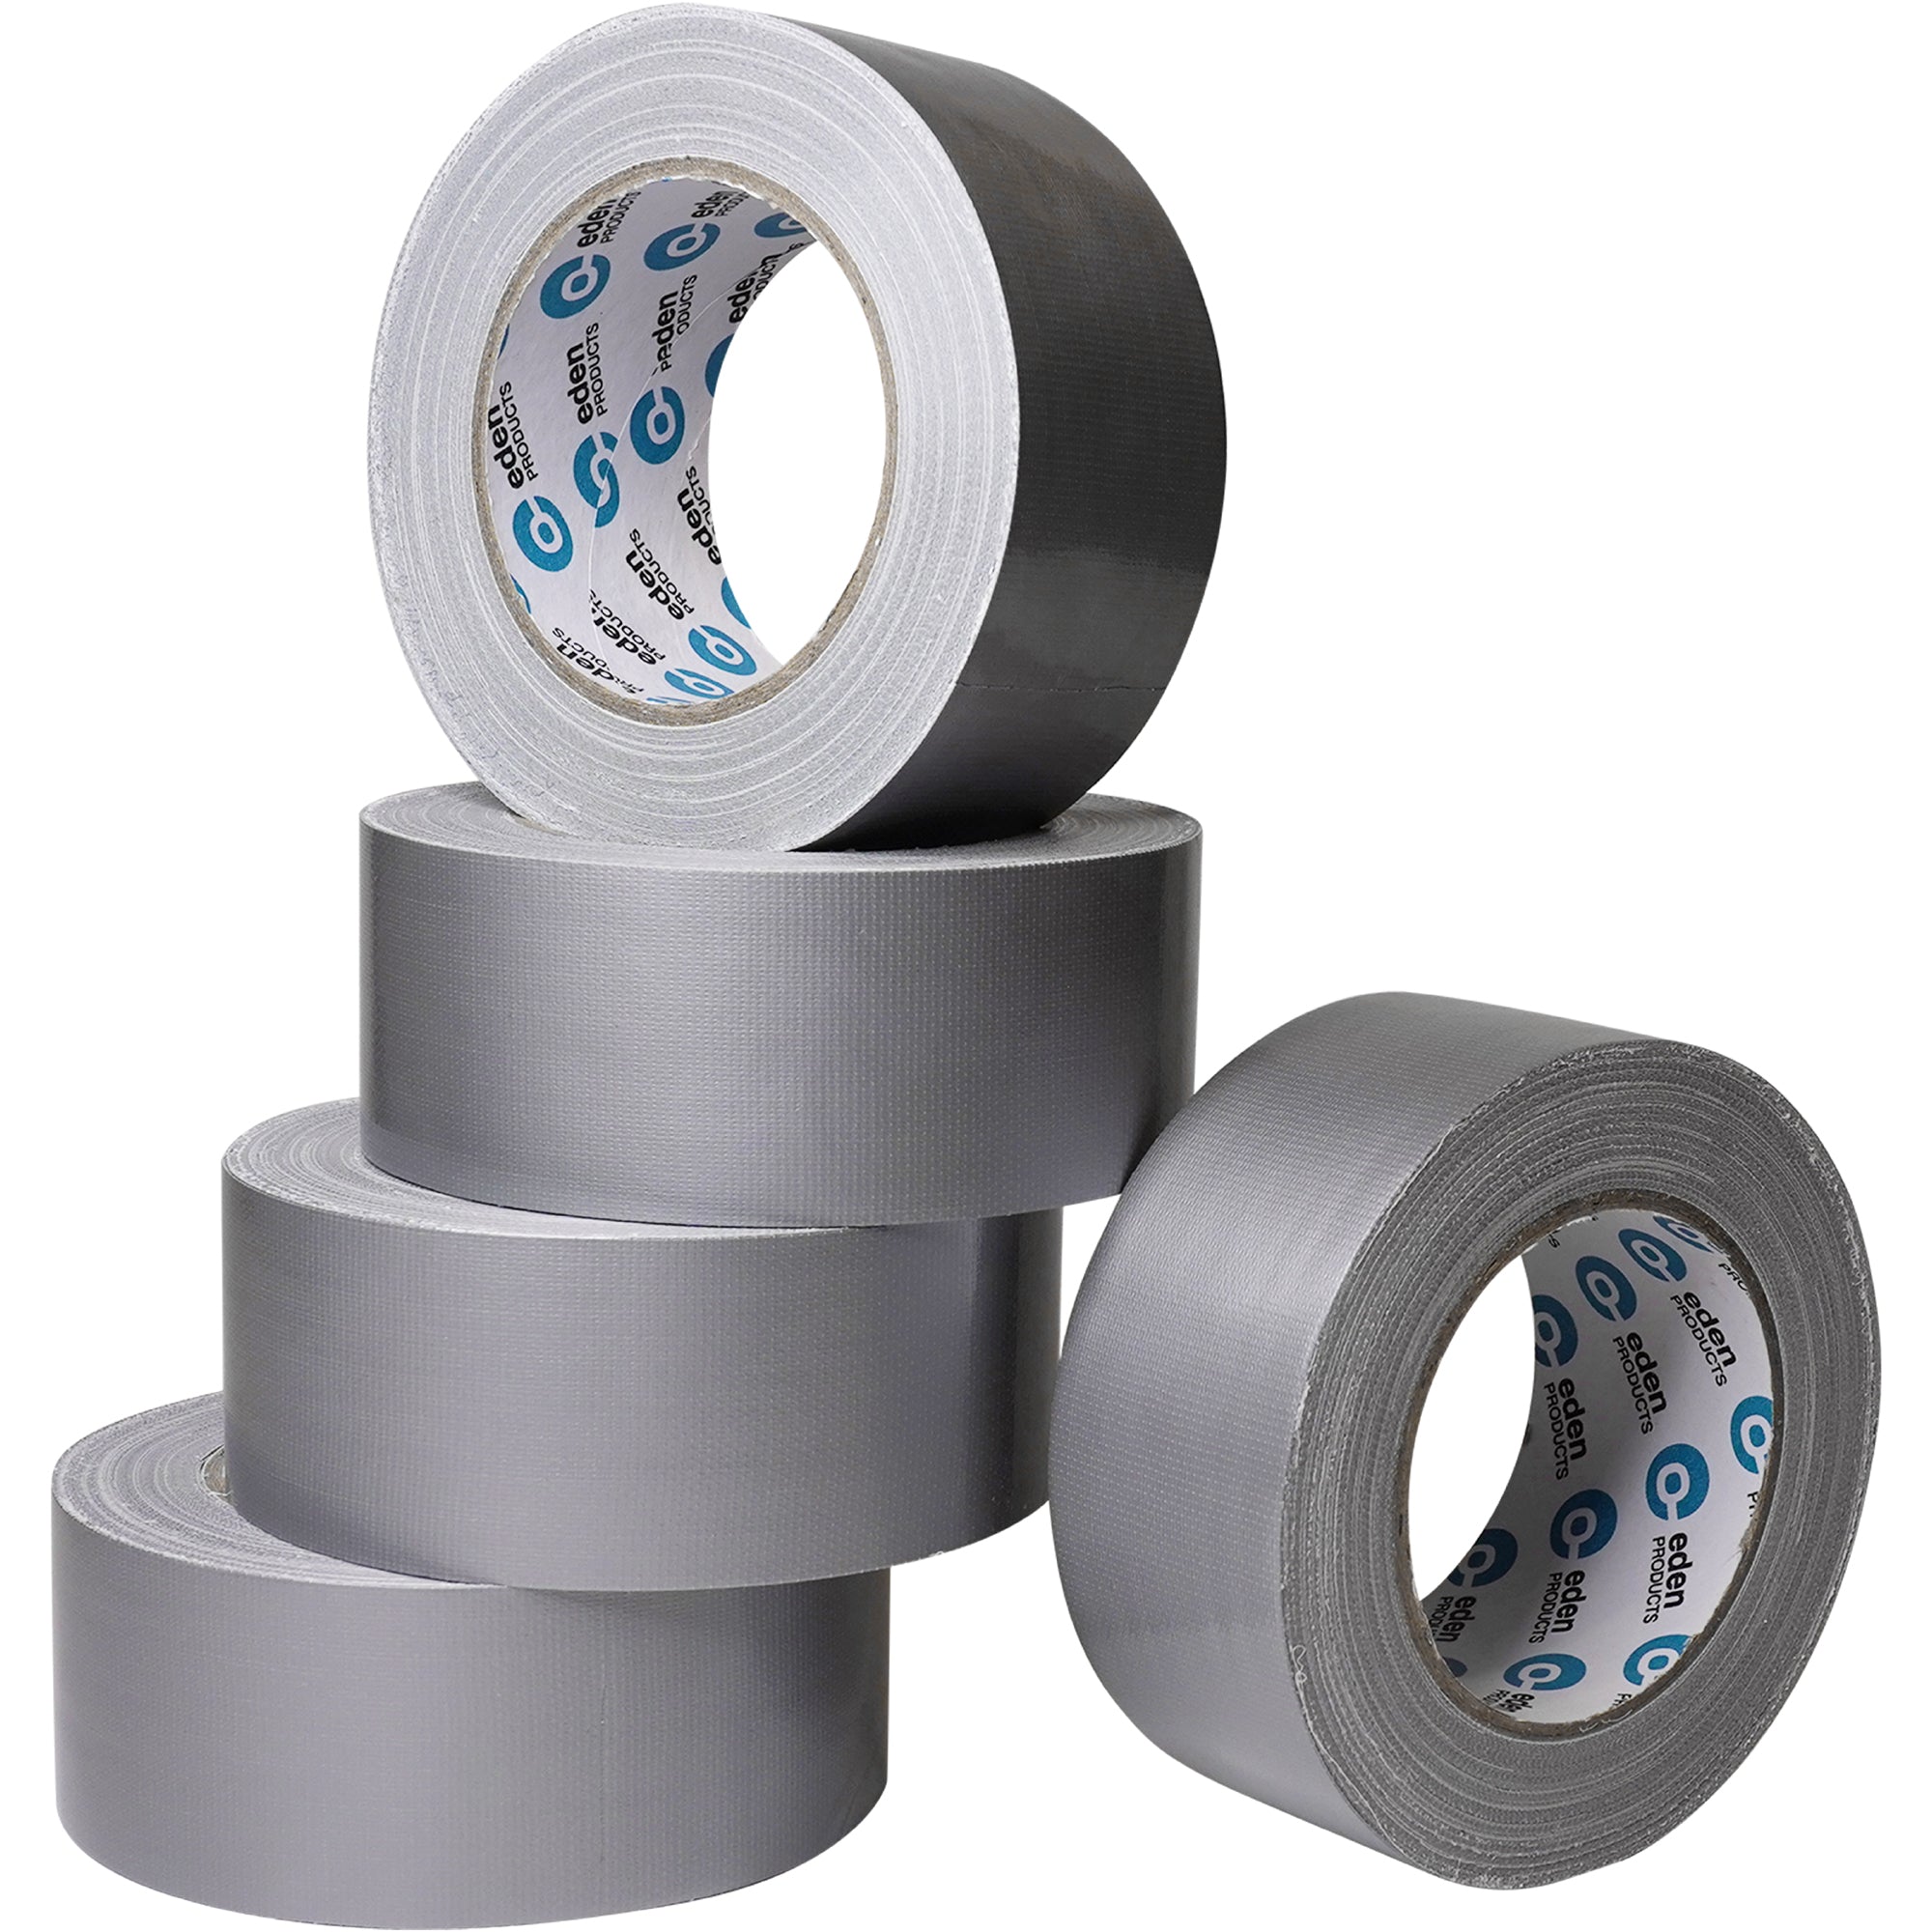 Breewell Duct Tape Heavy Duty Waterproof No Residue Tearable Duct